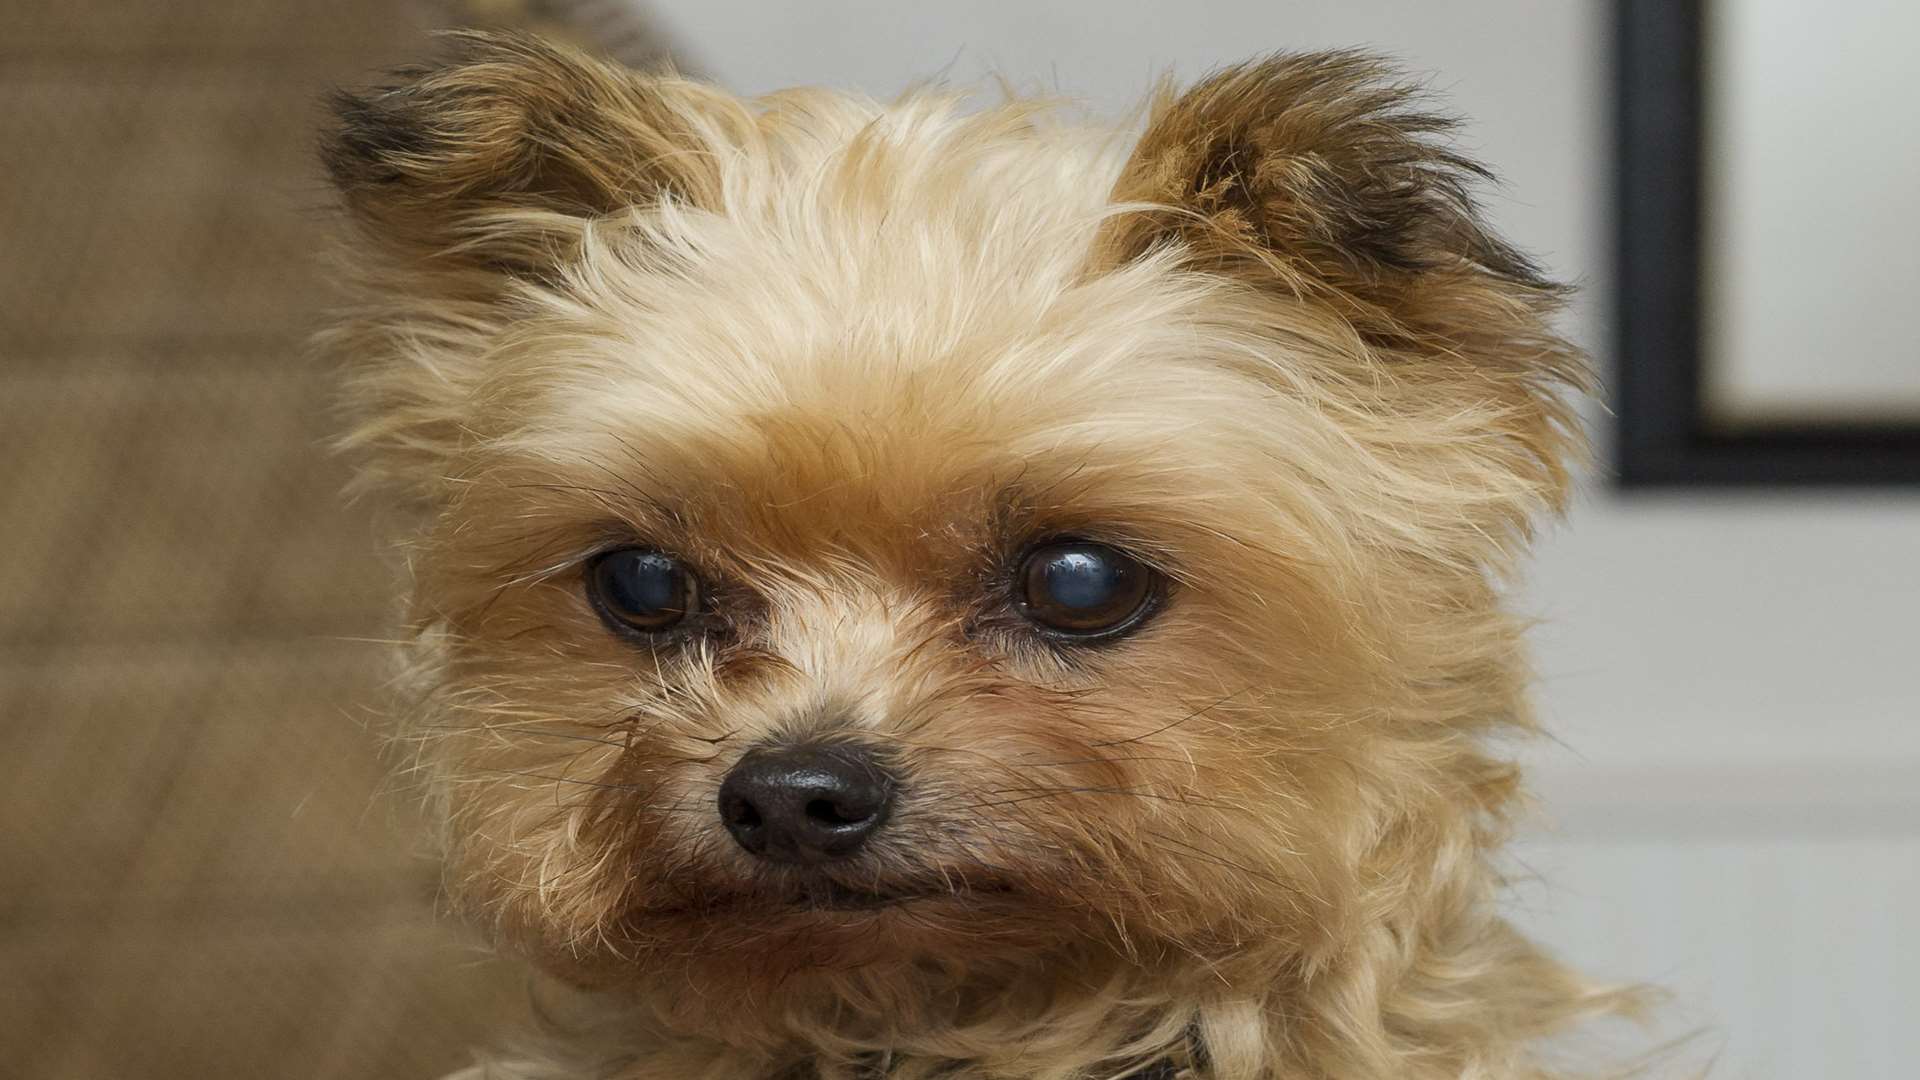 Pepe, a Yorkie-Chihuahua cross, was attacked